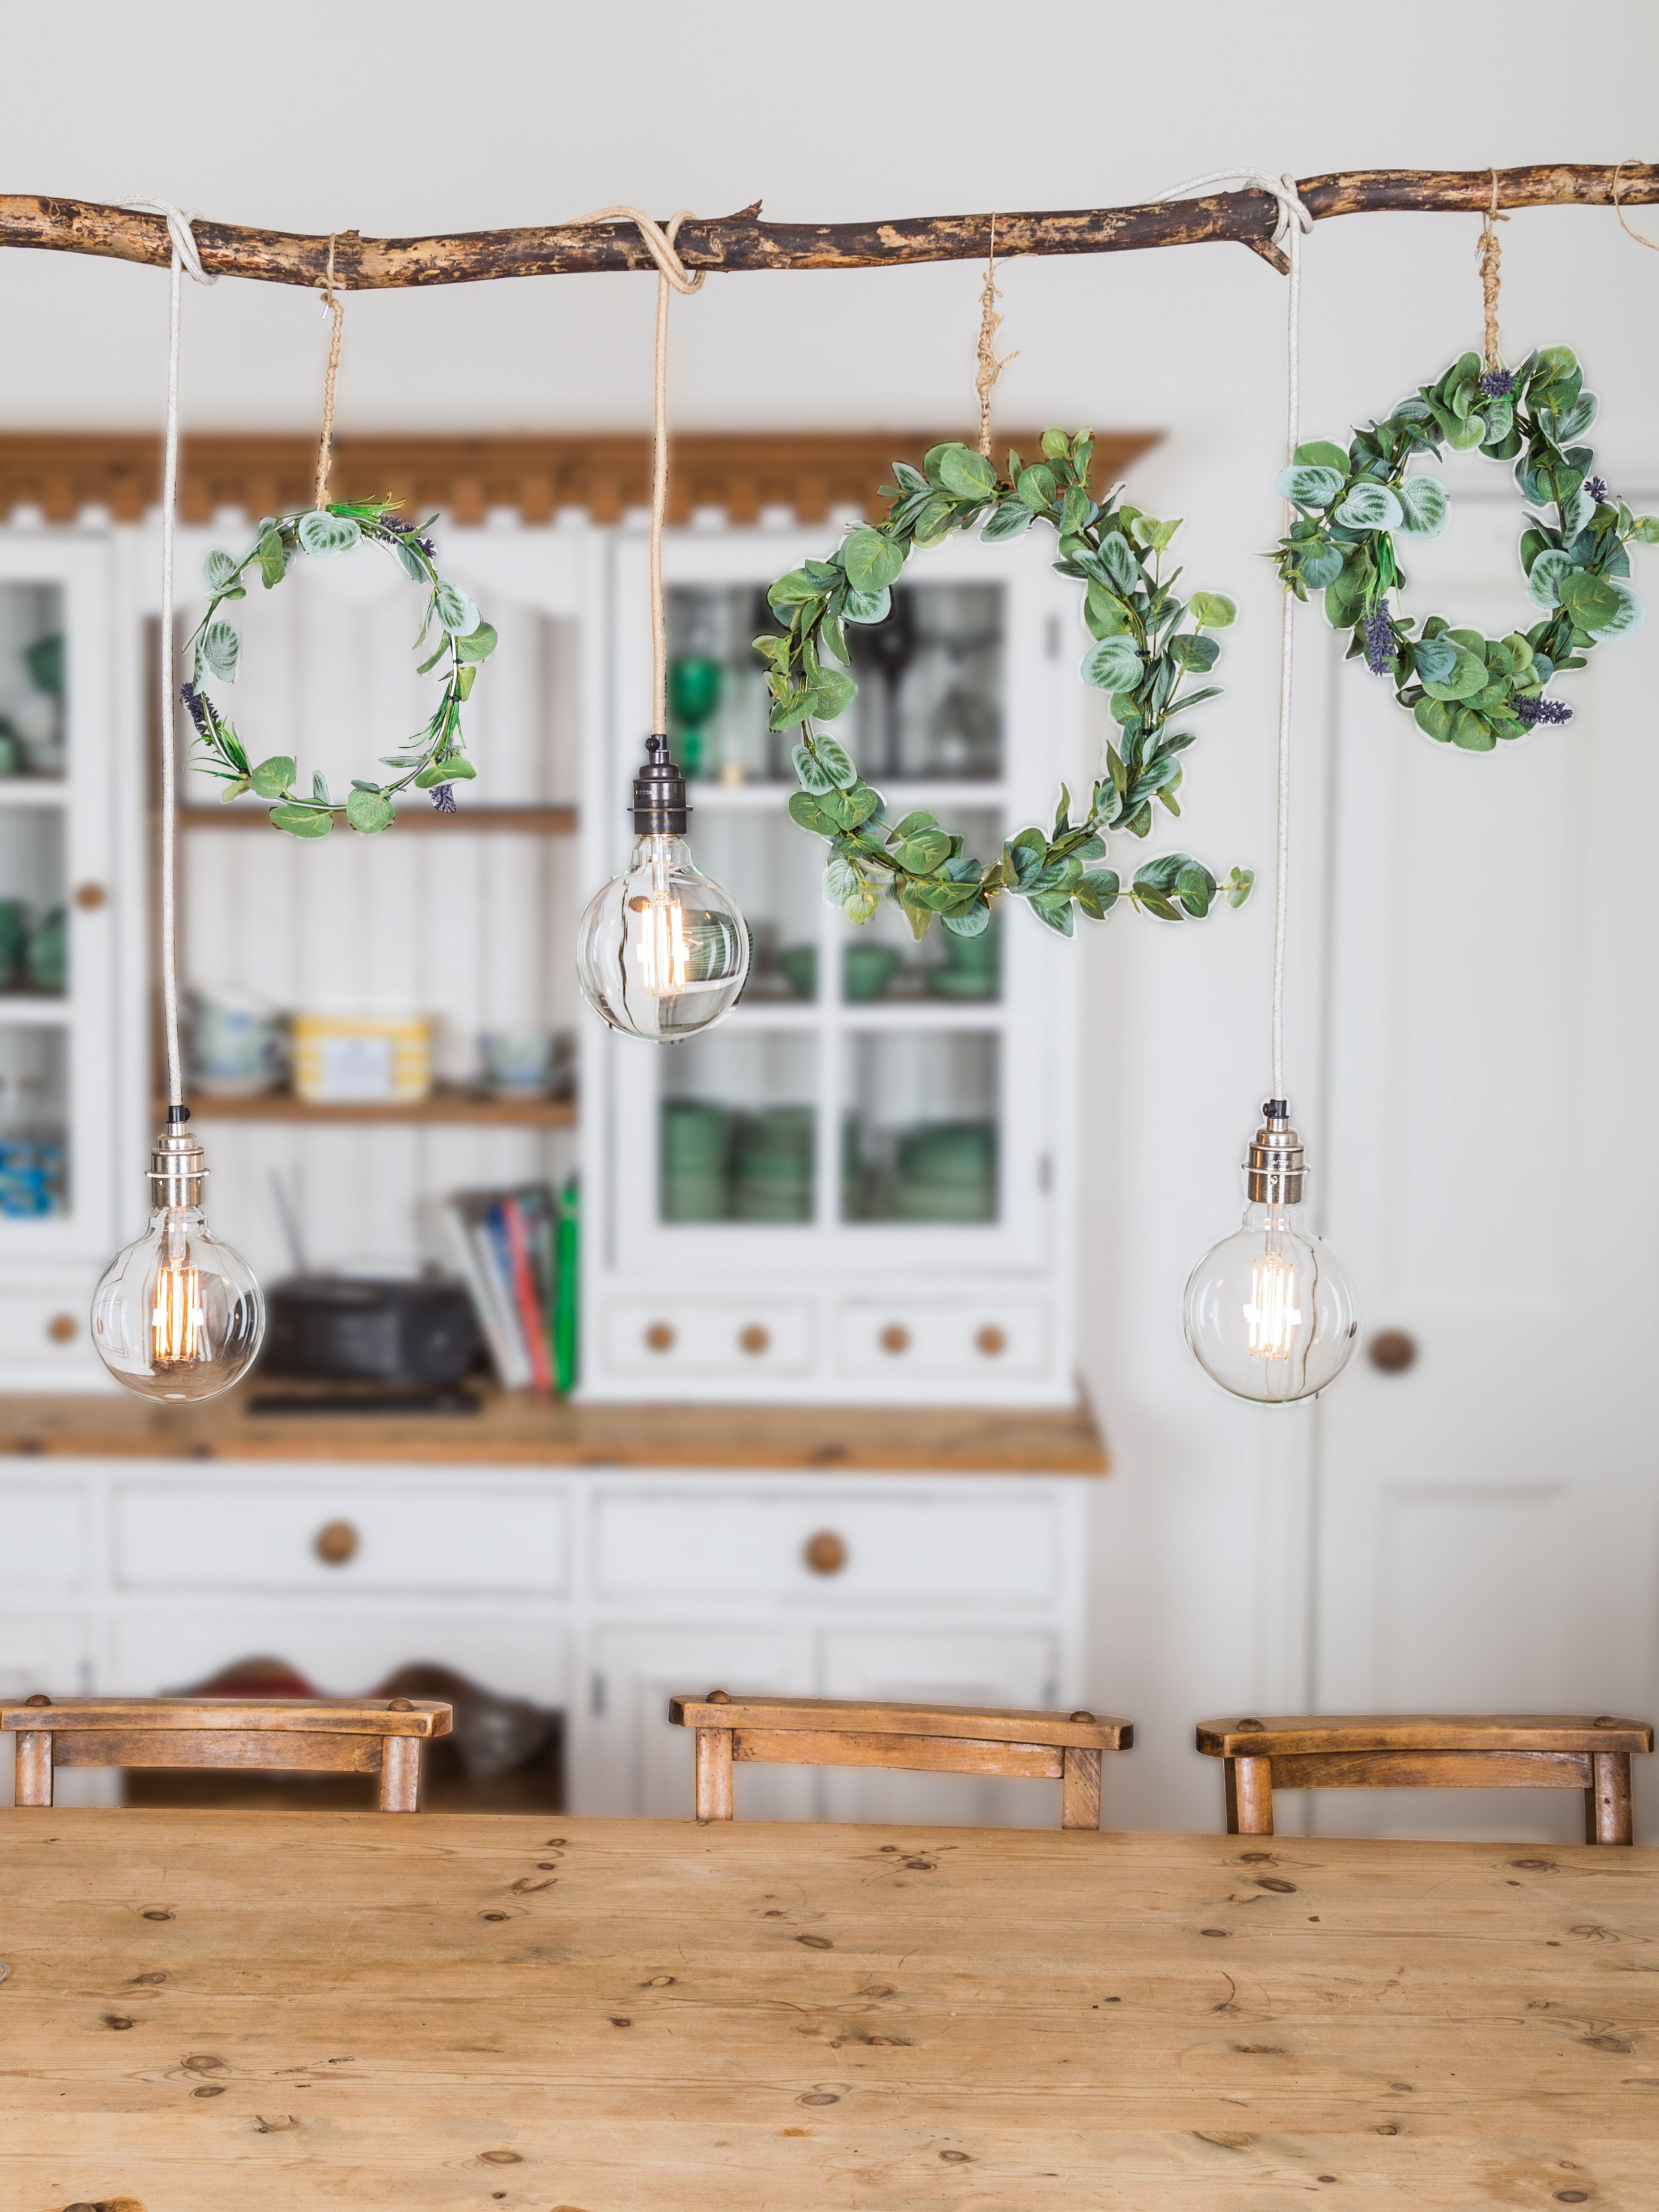 Get The Festive Feels - Cosy Christmas Lighting From Urban Cottage